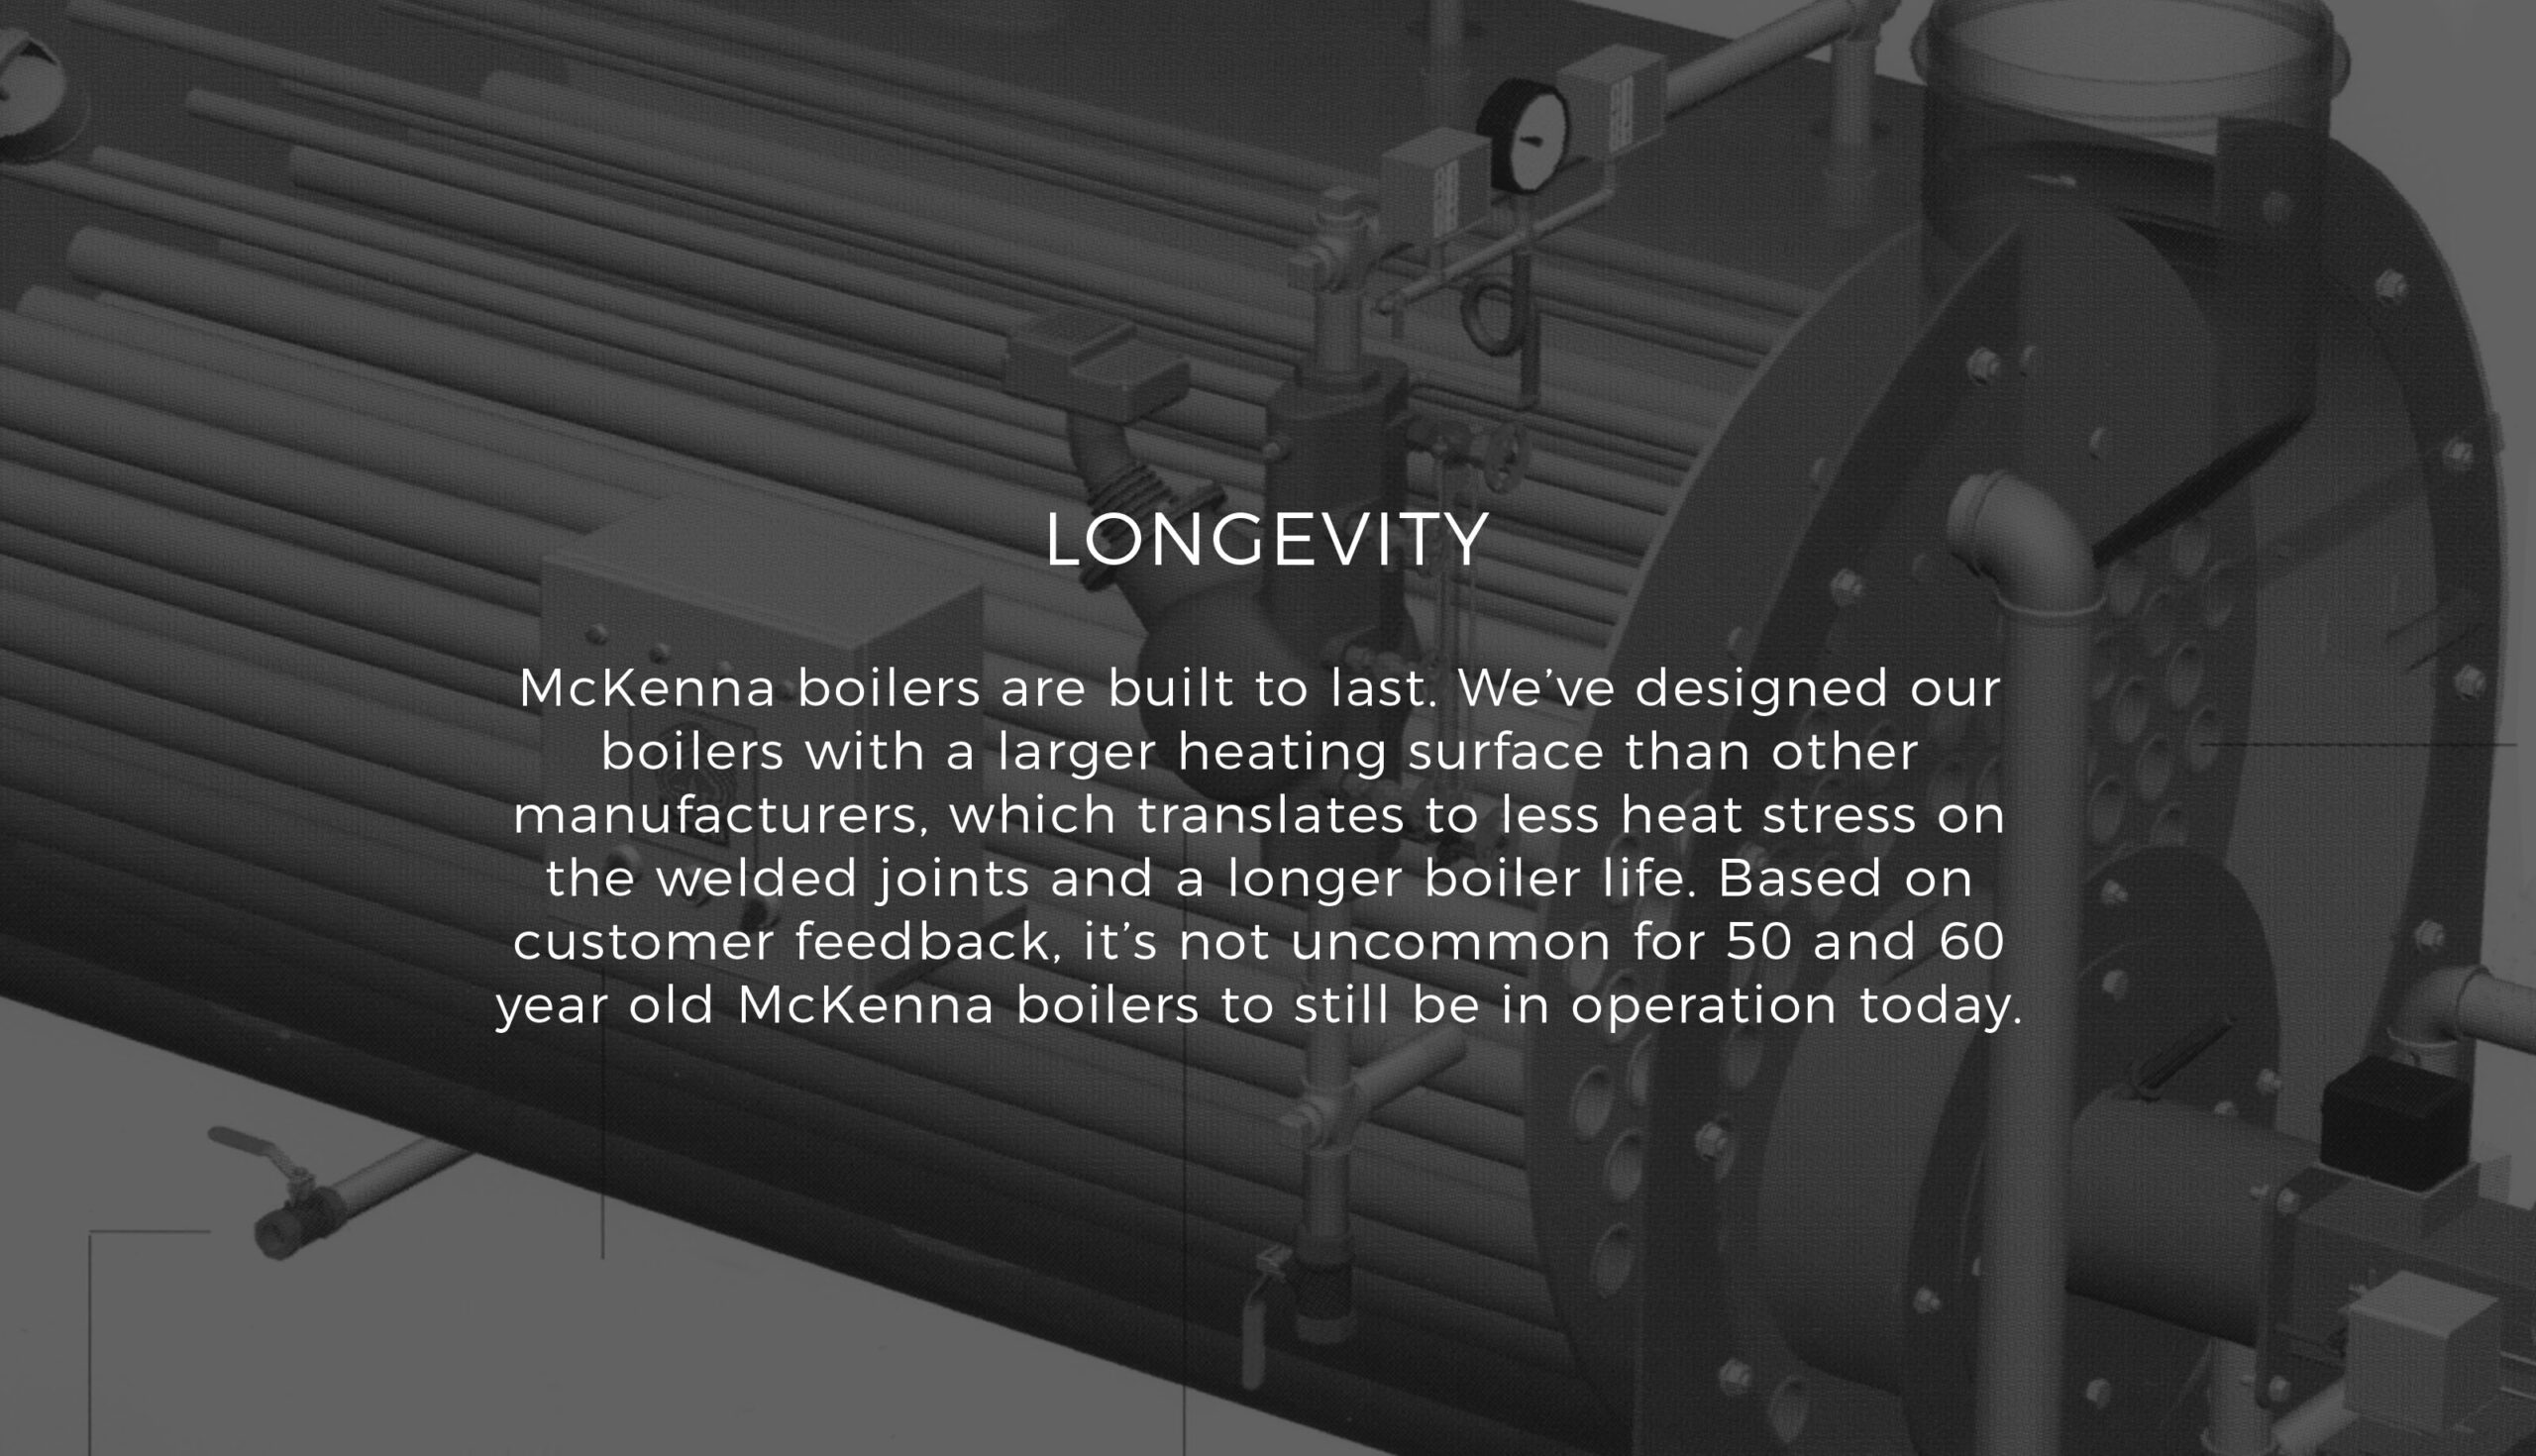 Long-standing Boilers by McKenna